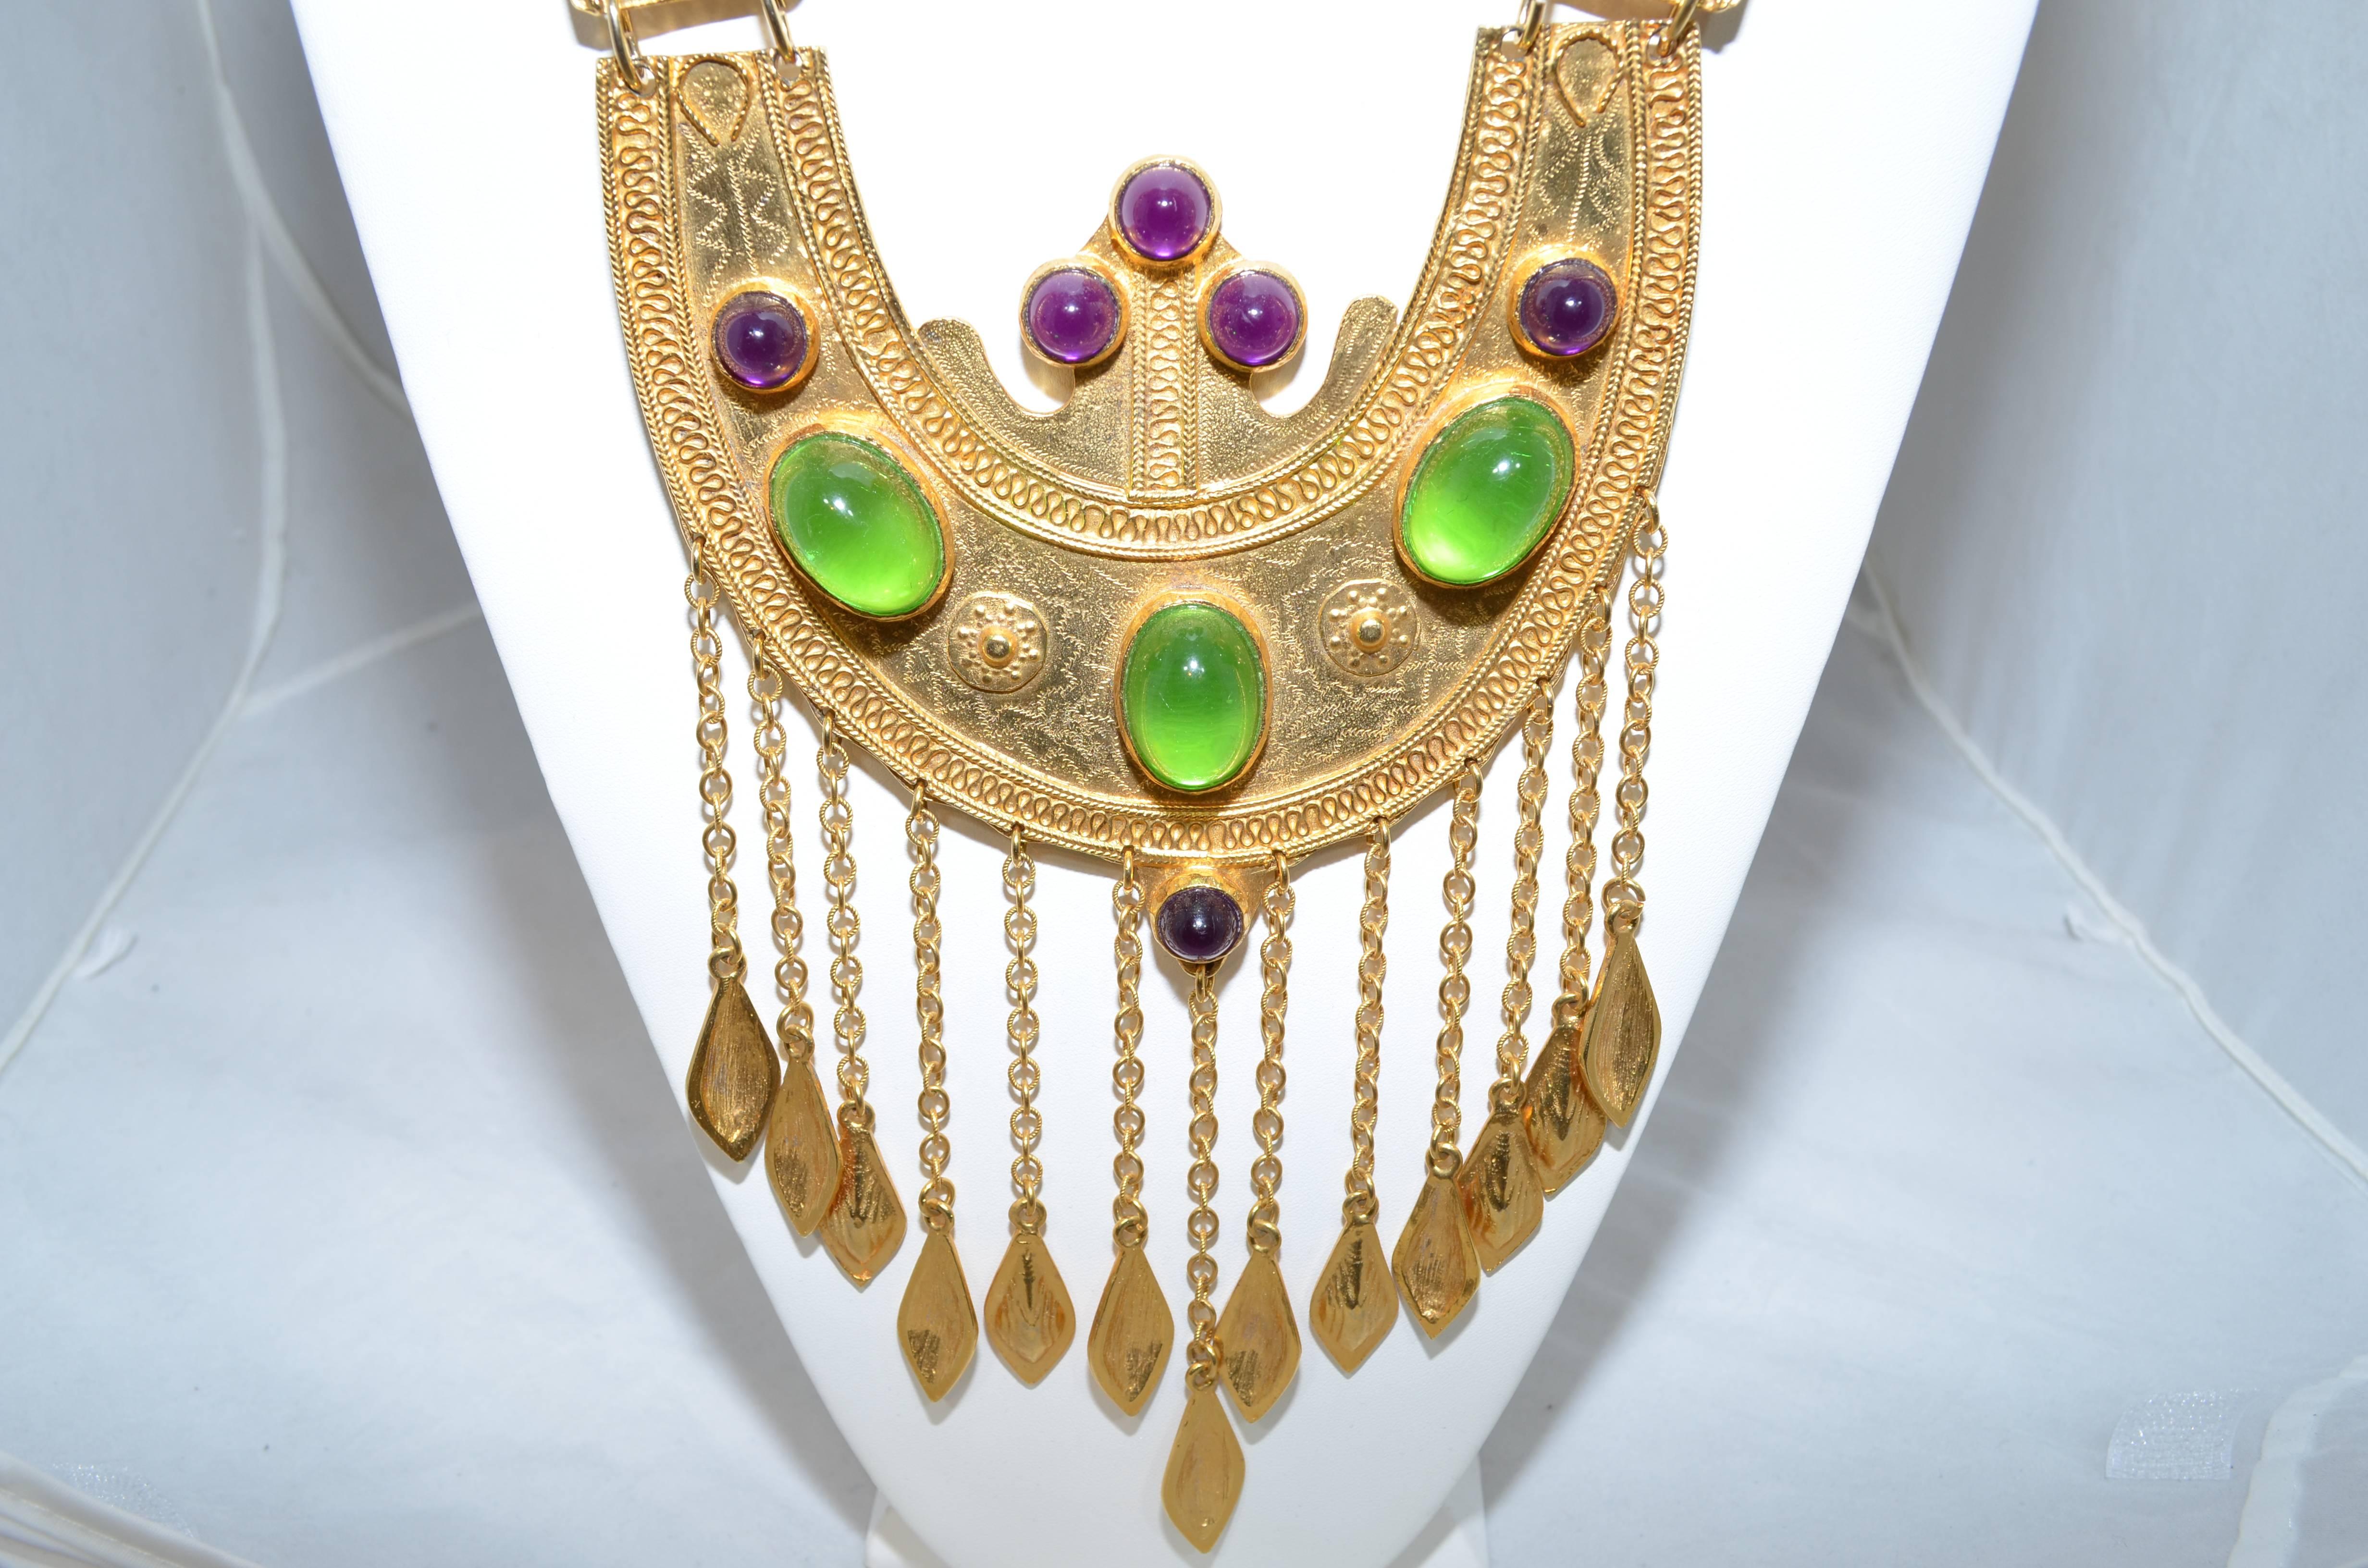 Amazing vintage statement Etruscan style necklace by Alexis Kirk is gold plated and featuring purple and green glass cabochons, with a fringed metal detail. 

American-born Armenian, Alexis Kirk was inspired by symbolism of different cultures and